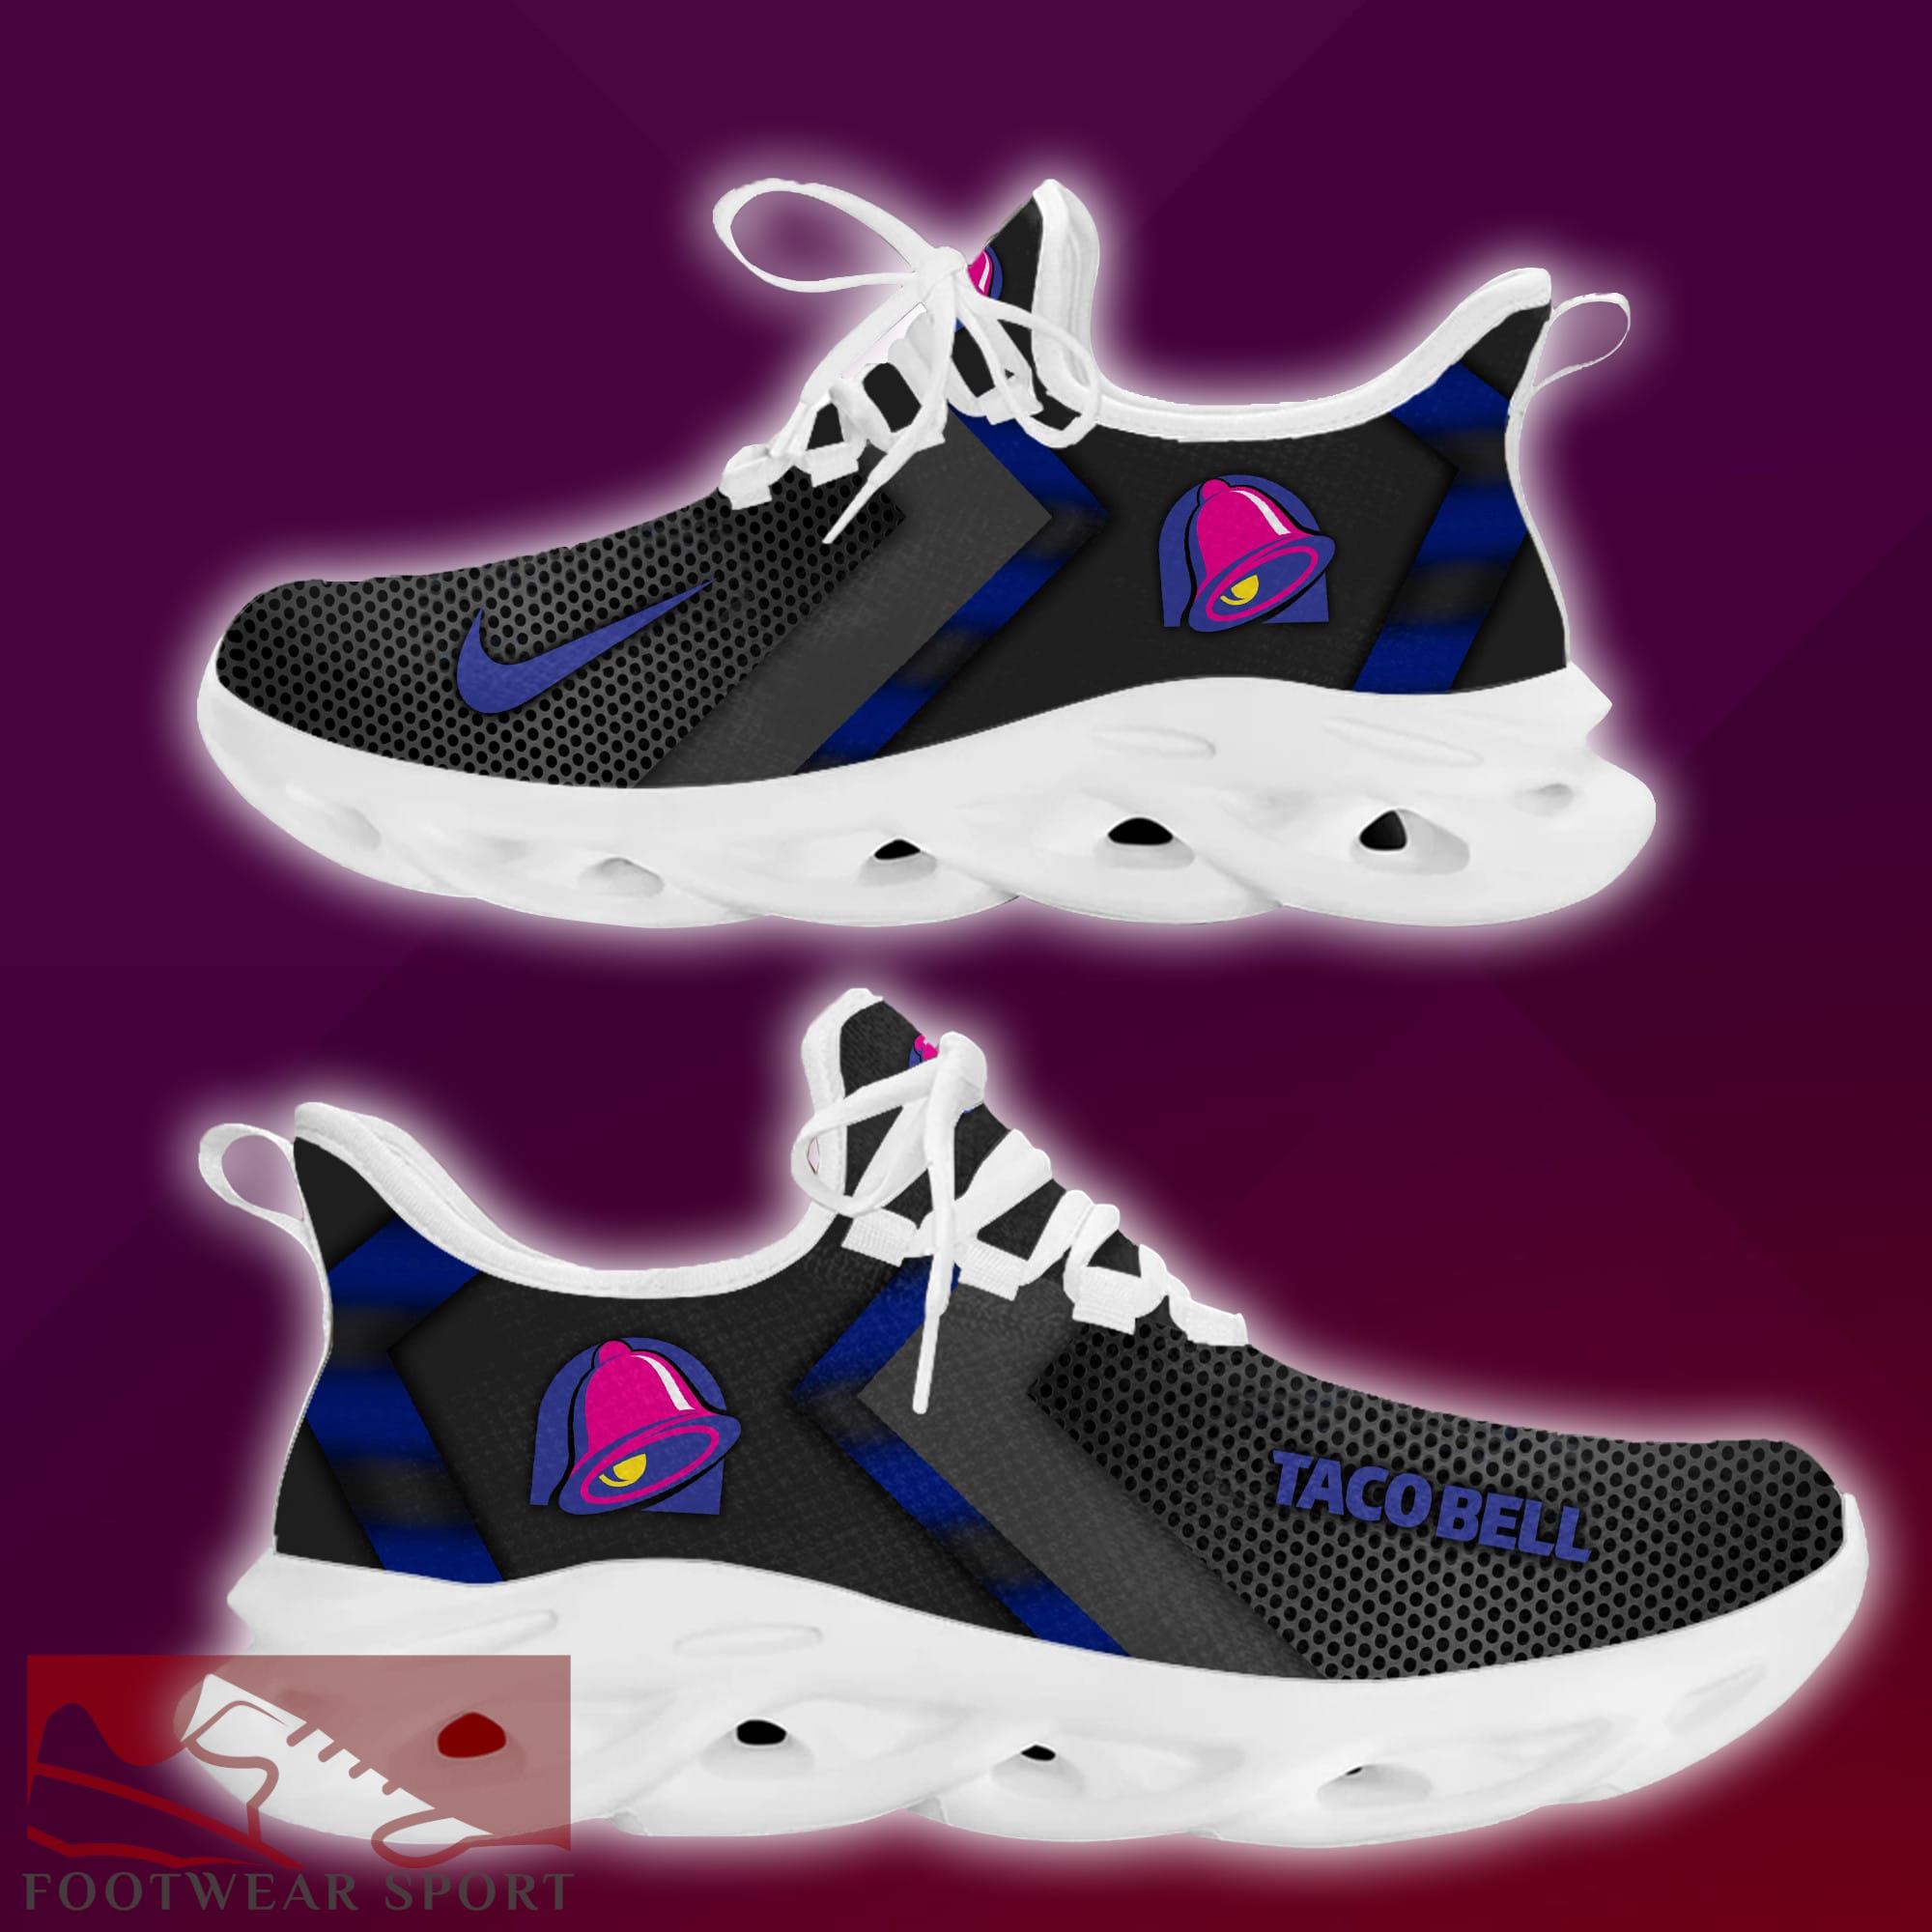 taco bell Brand New Logo Max Soul Sneakers Panache Running Shoes Gift - taco bell New Brand Chunky Shoes Style Max Soul Sneakers Photo 2